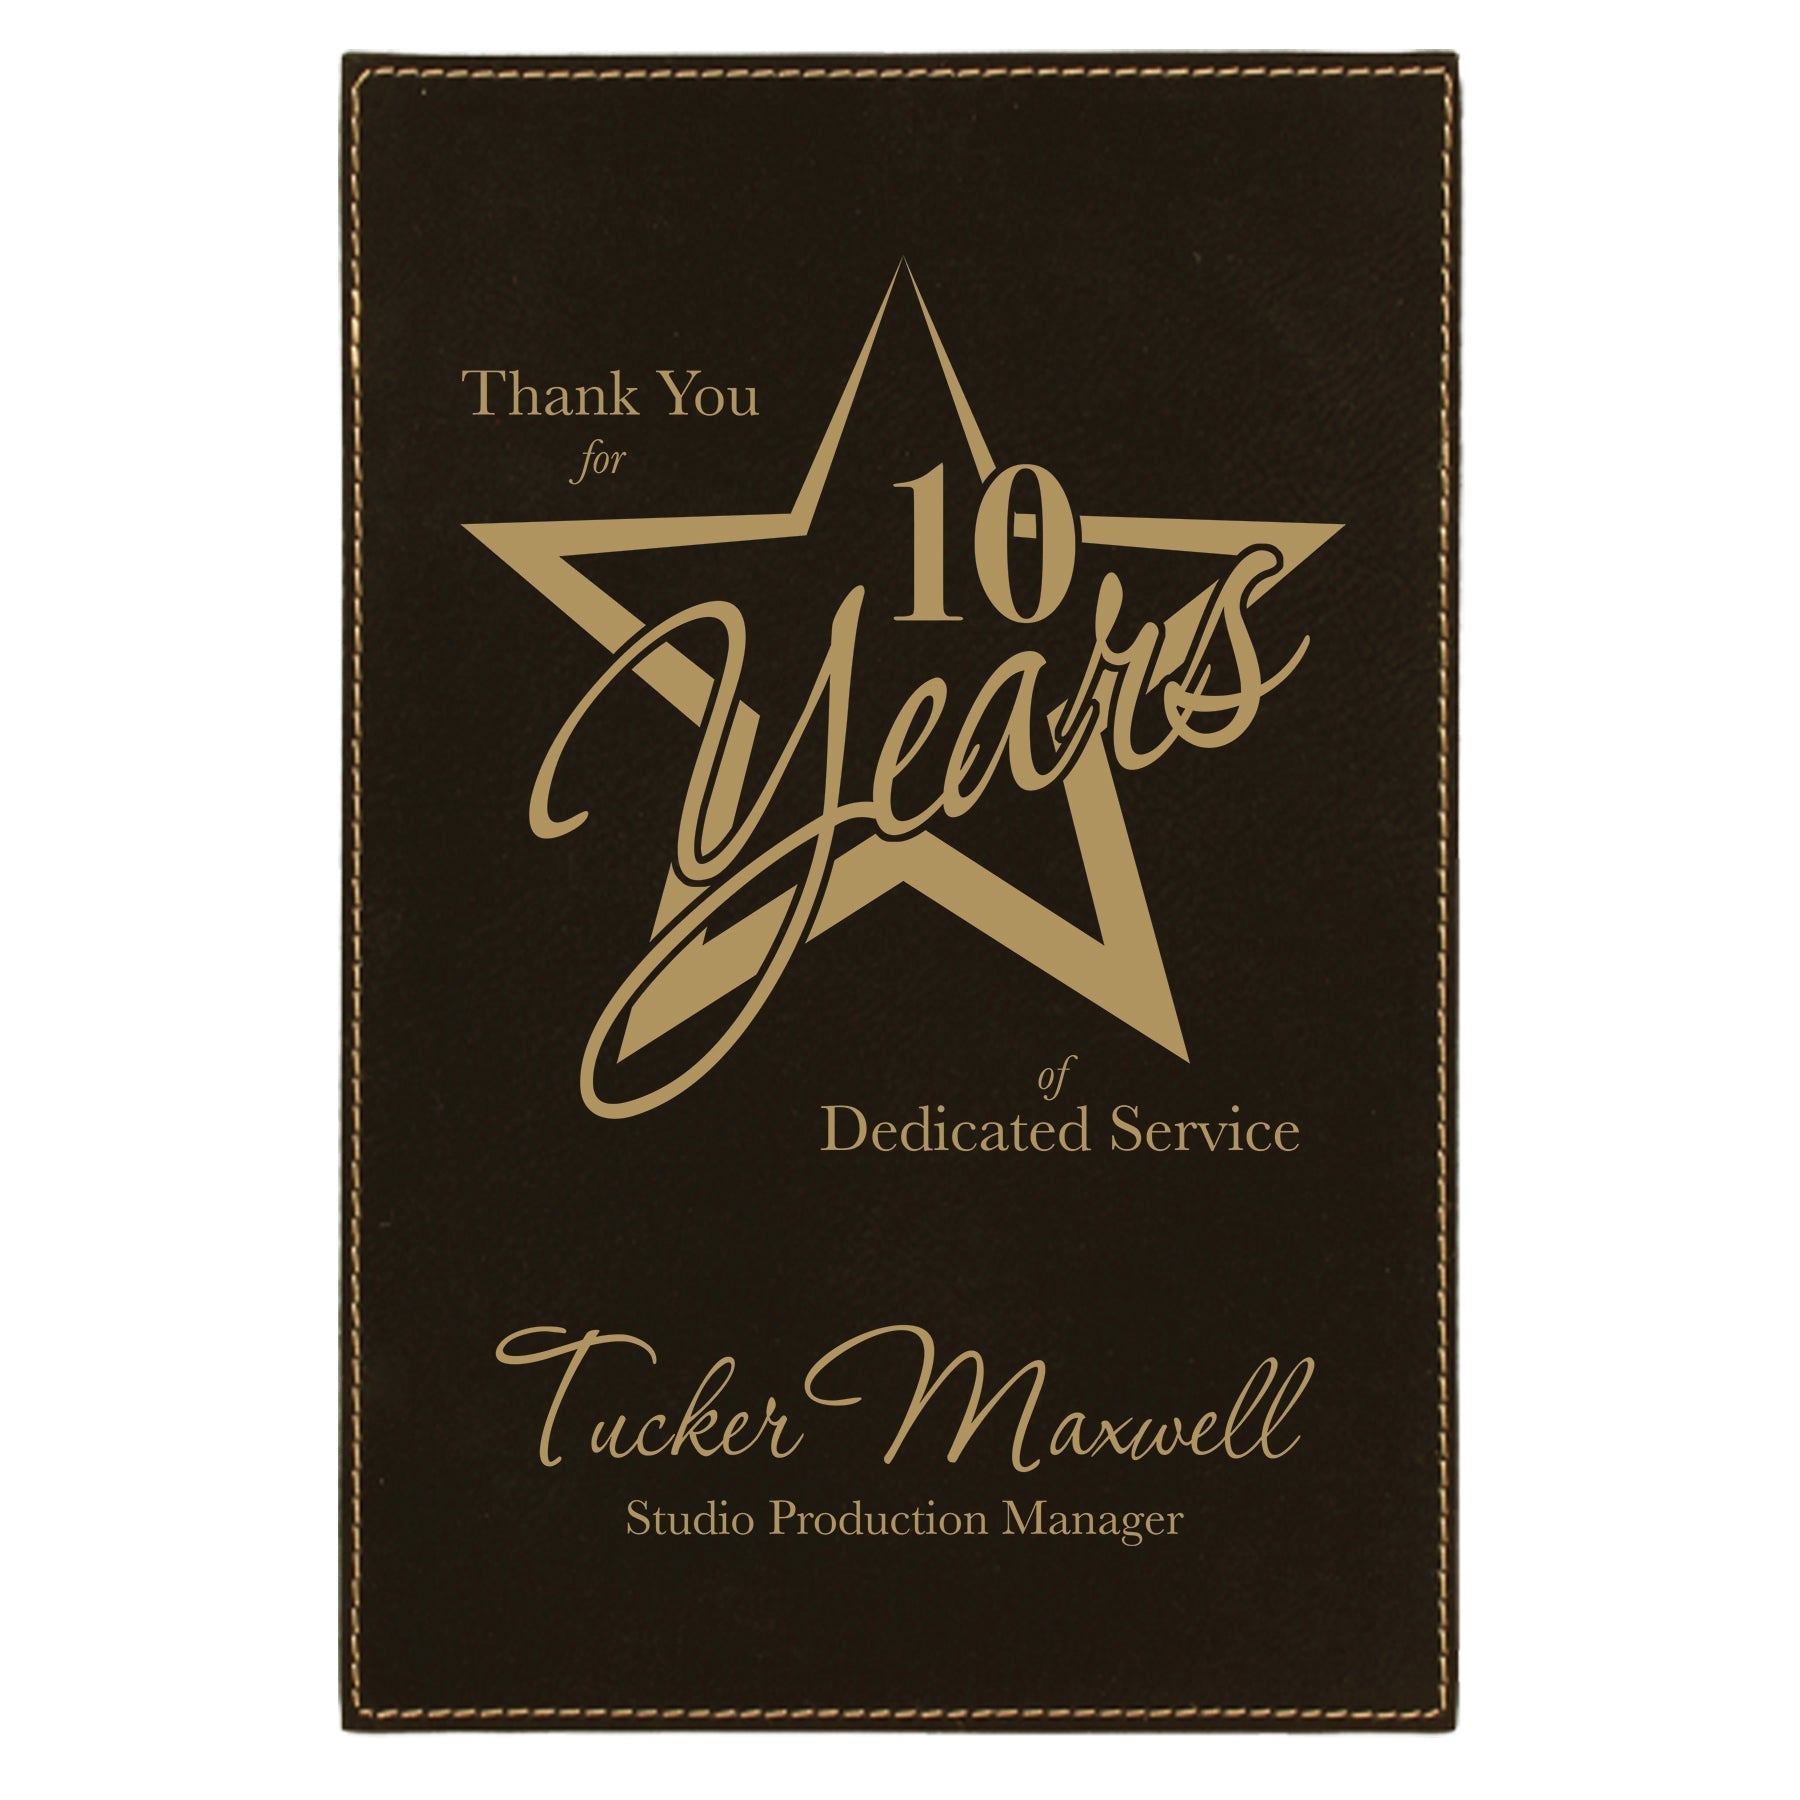 Plaque Plate, Laserable Leatherette, 6" x 8", Laser Engraved Plaque Plate Craftworks NW Black/Gold 